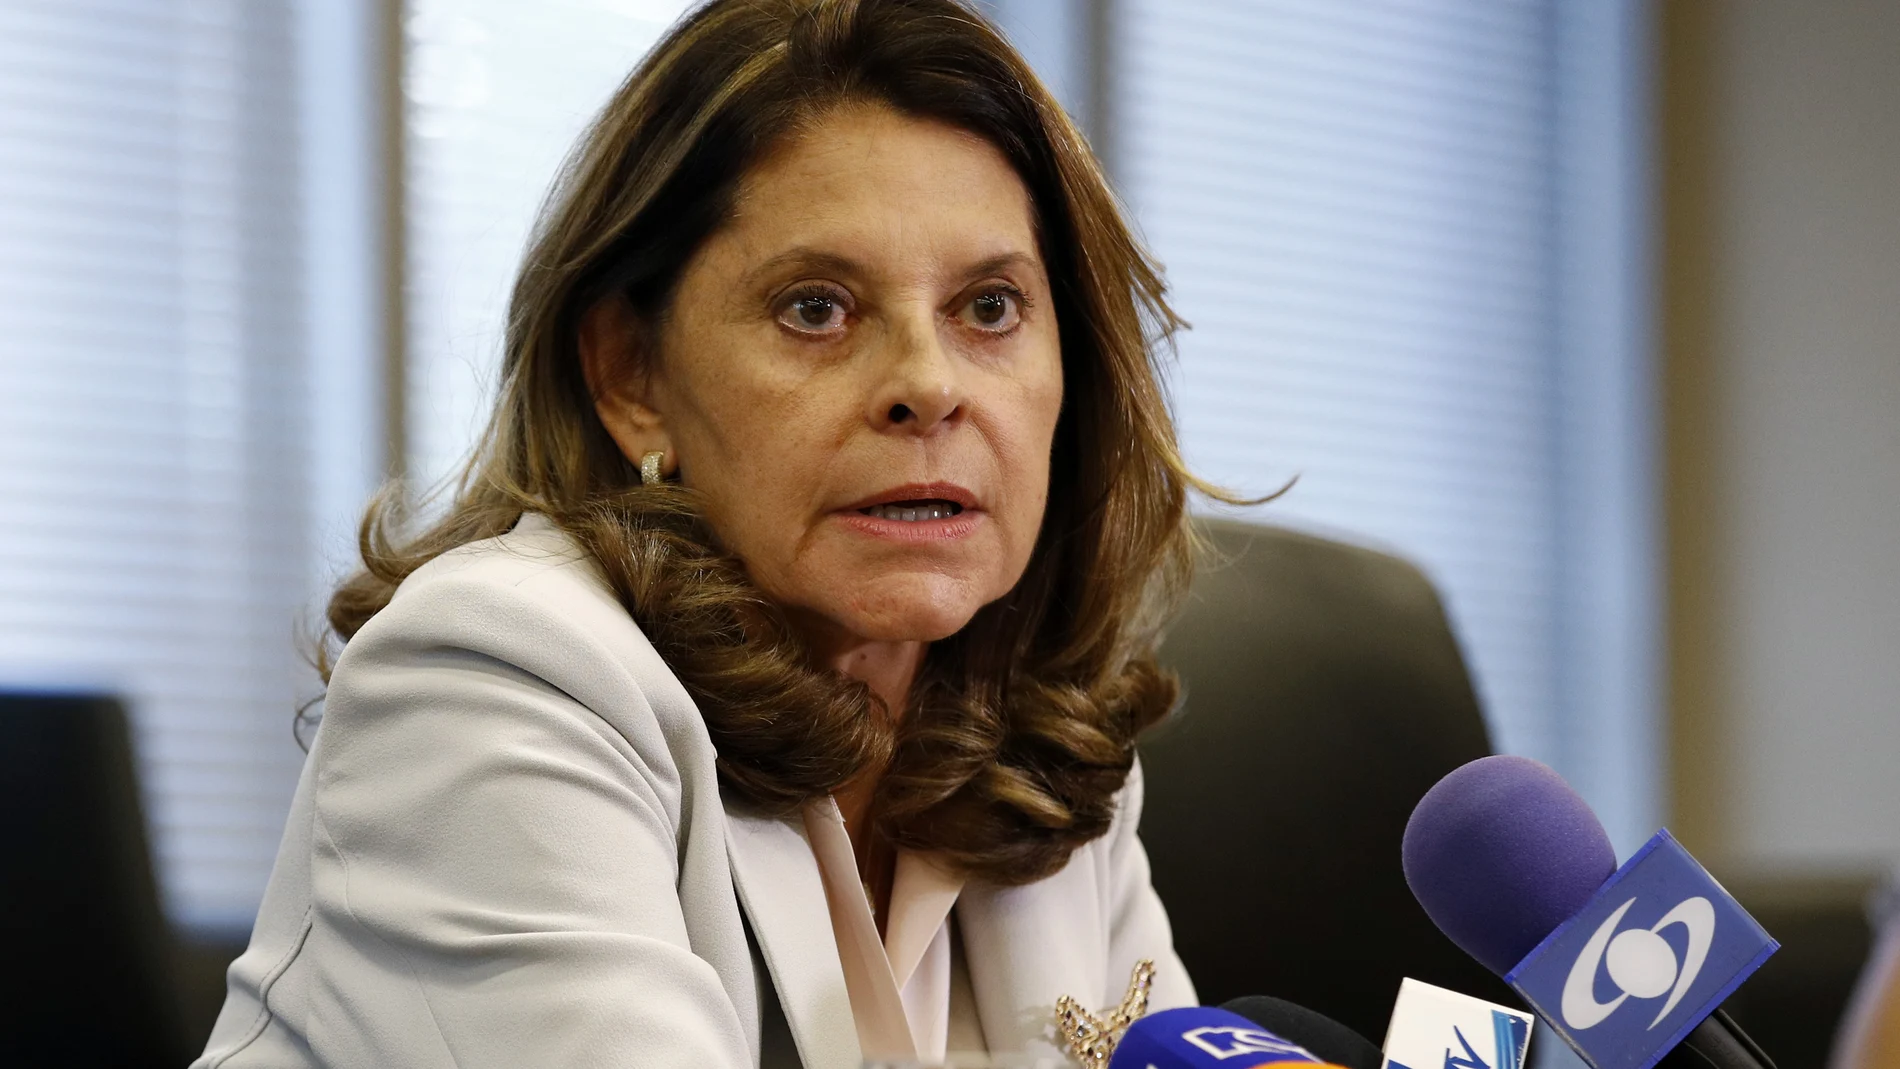 FILE - In this May 6, 2019 file photo, Colombia's Vice President Marta Lucia Ramirez speaks at a news conference at the Colombian embassy in Washington. President Ivan Duque has named Ramirez on Wednesday, May 19, 2021, to be the country's next Foreign Minister. (AP Photo/Patrick Semansky)